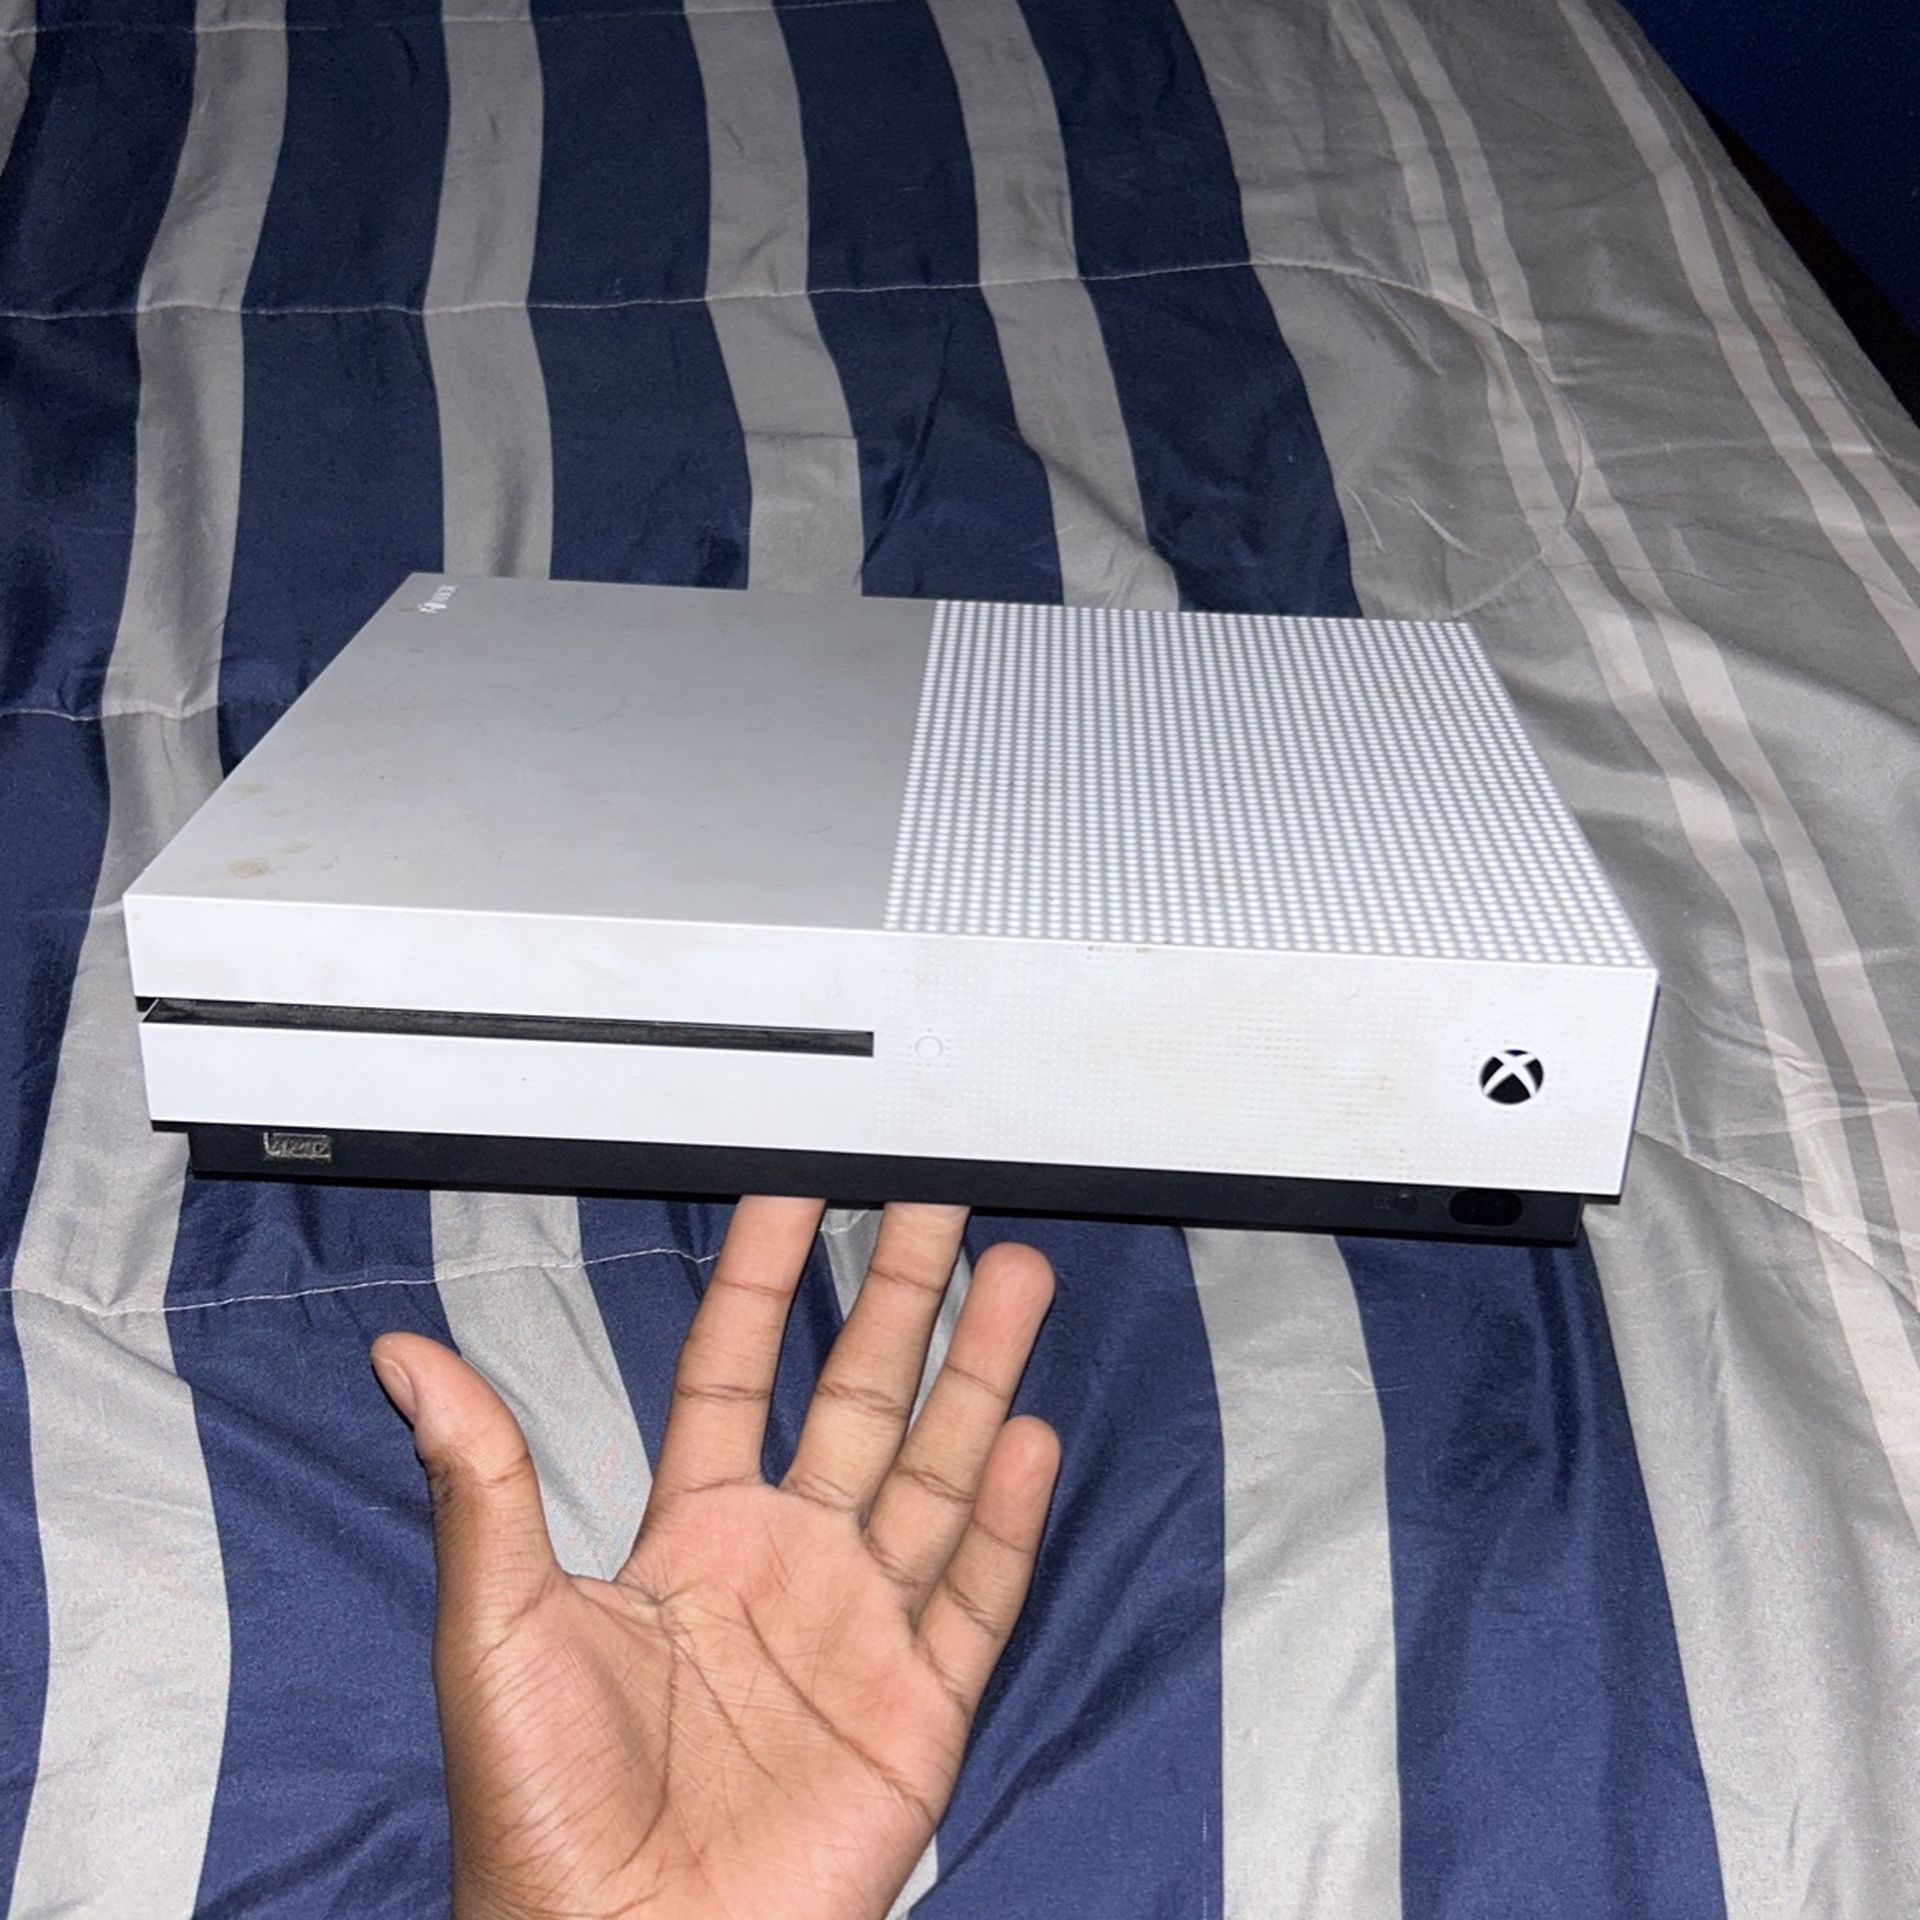 Xbox 1, Comes with controller and power cable, send offers